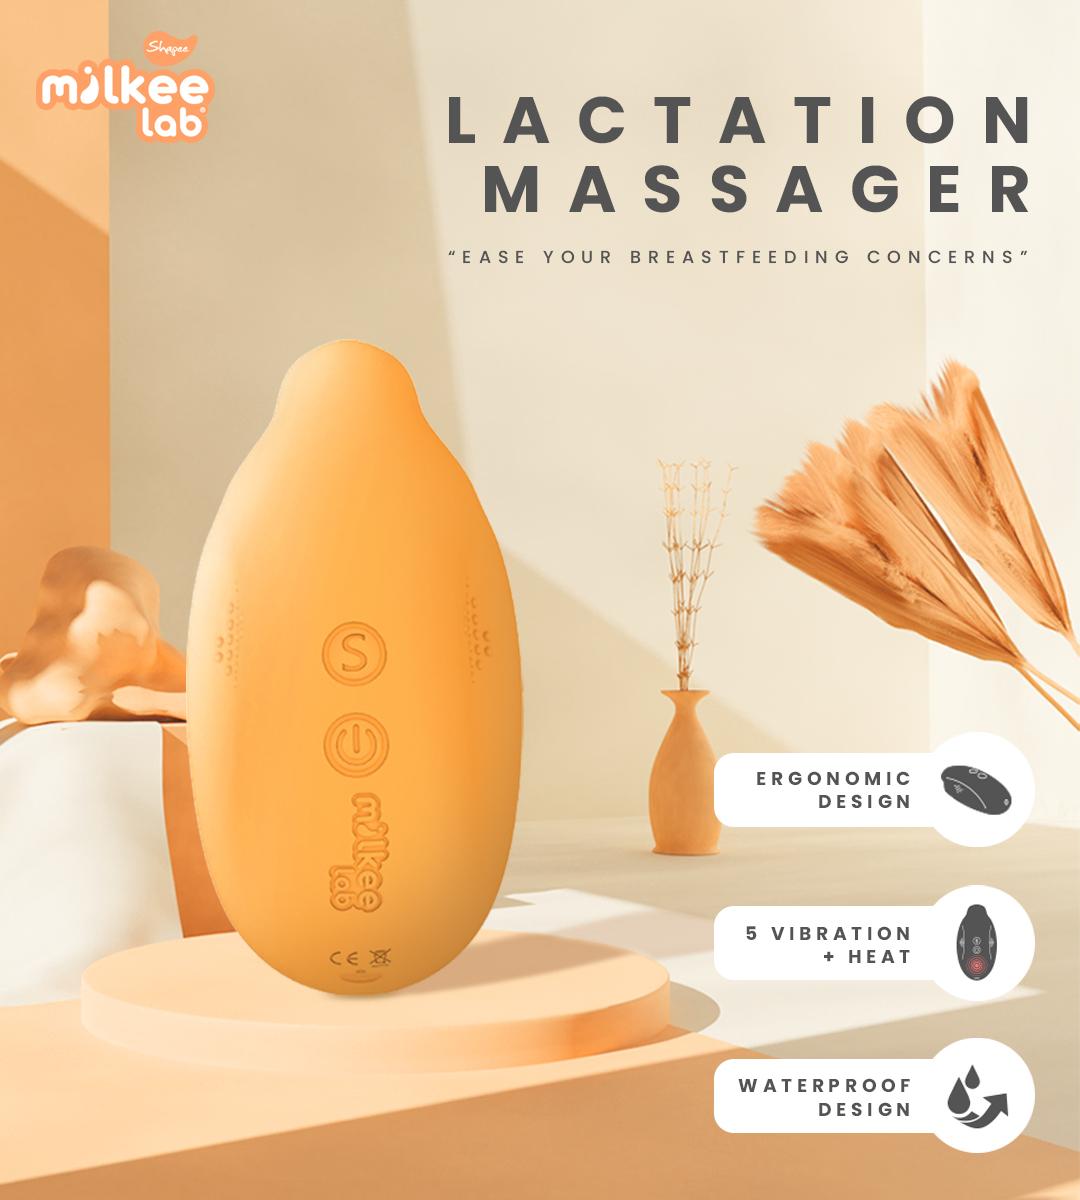 Seasonal Steal Milkee Lab Lactation Massager Subplace: Subscriptions Make  Life Easier, breastfeeding massager with heat